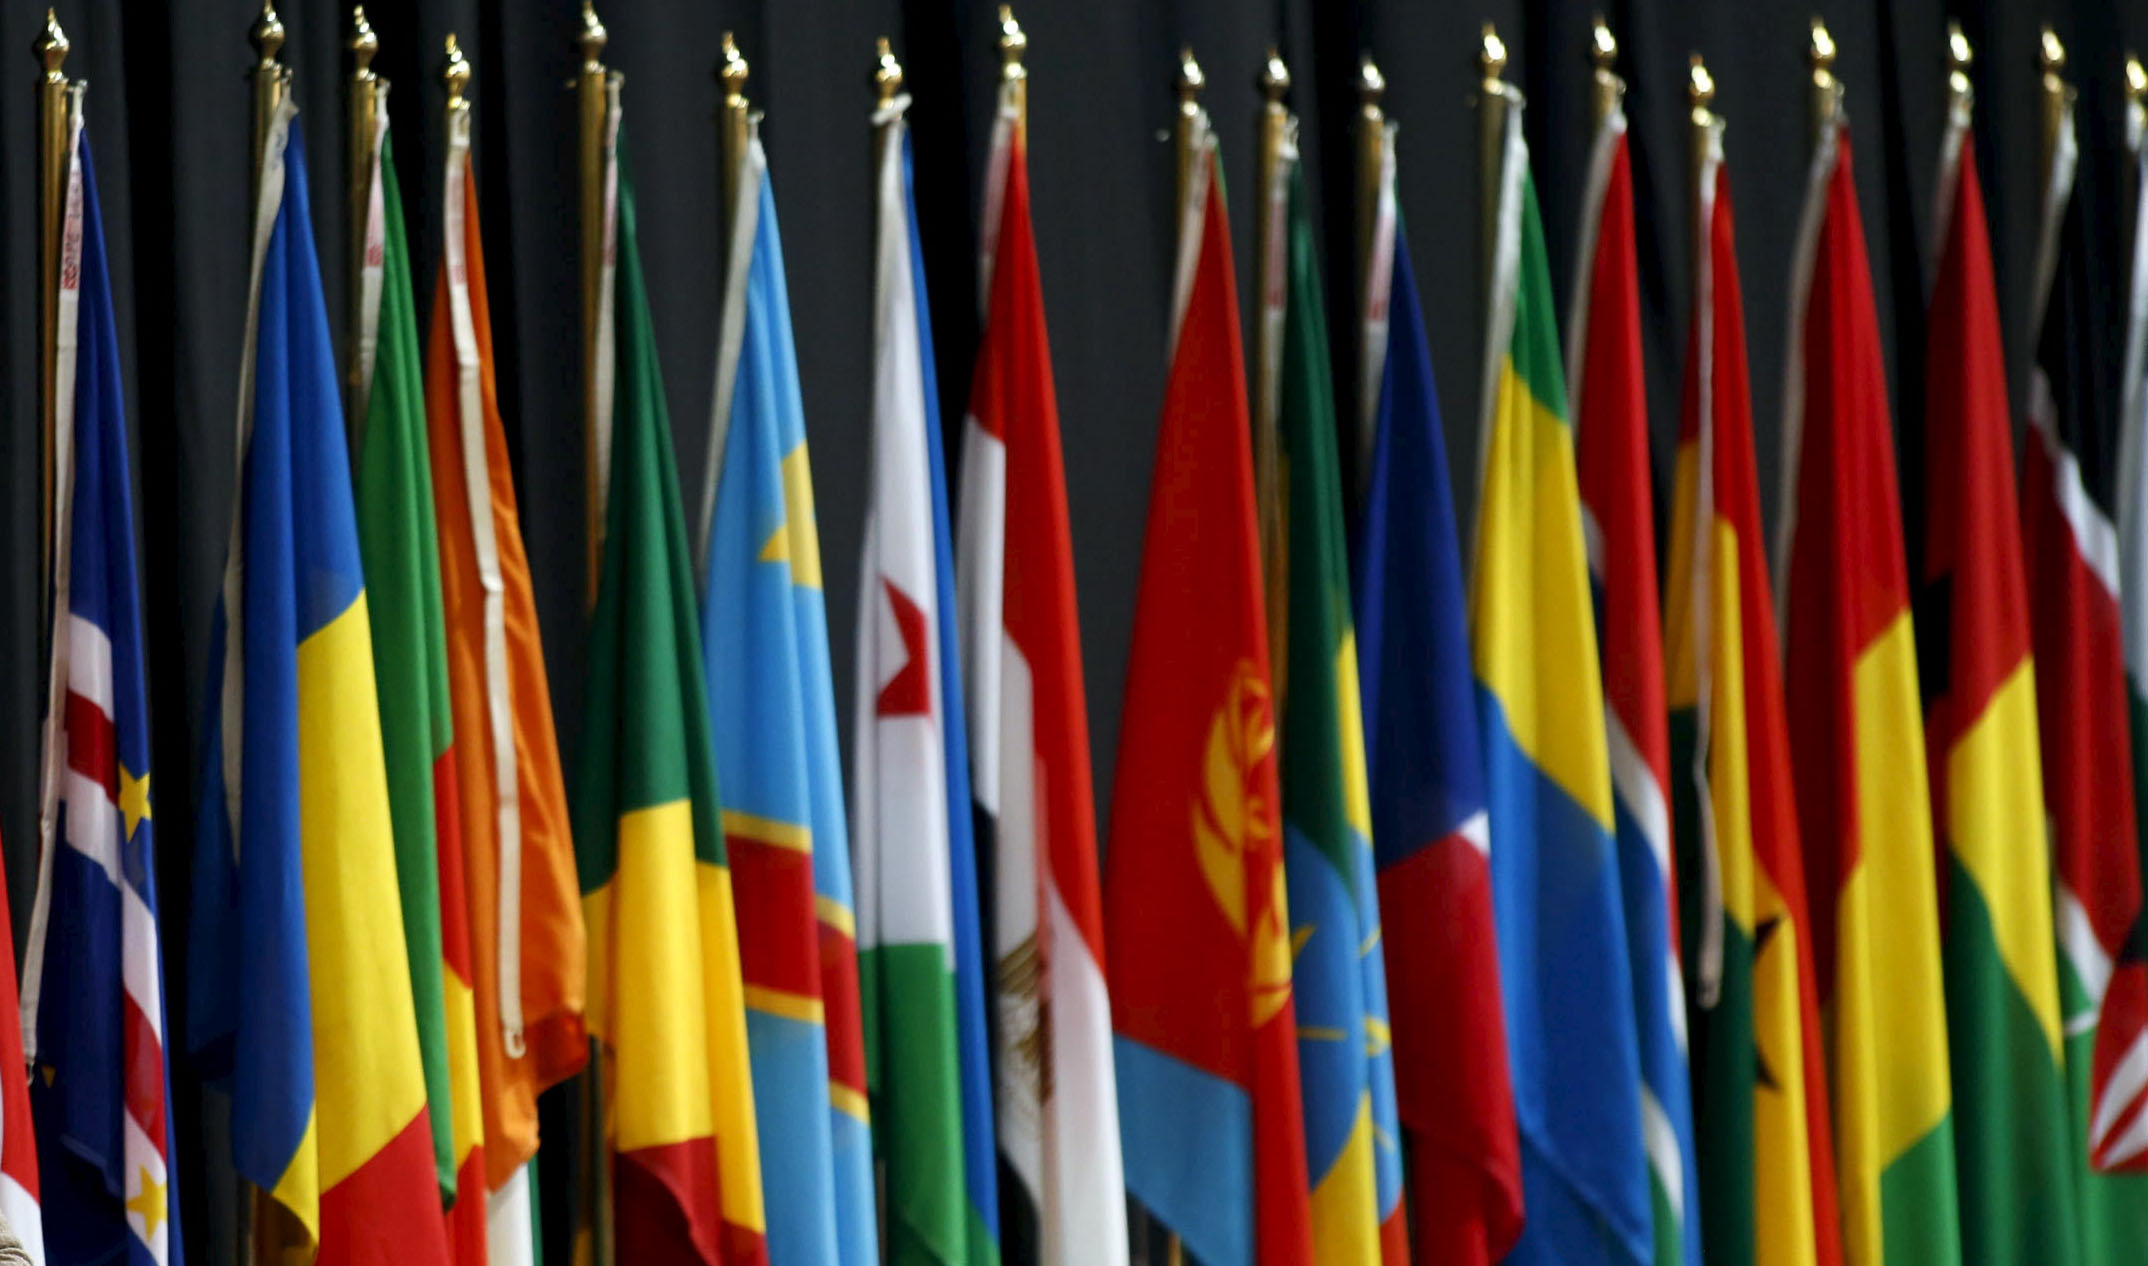 Image of flags of African nations from the Brookings Institute.